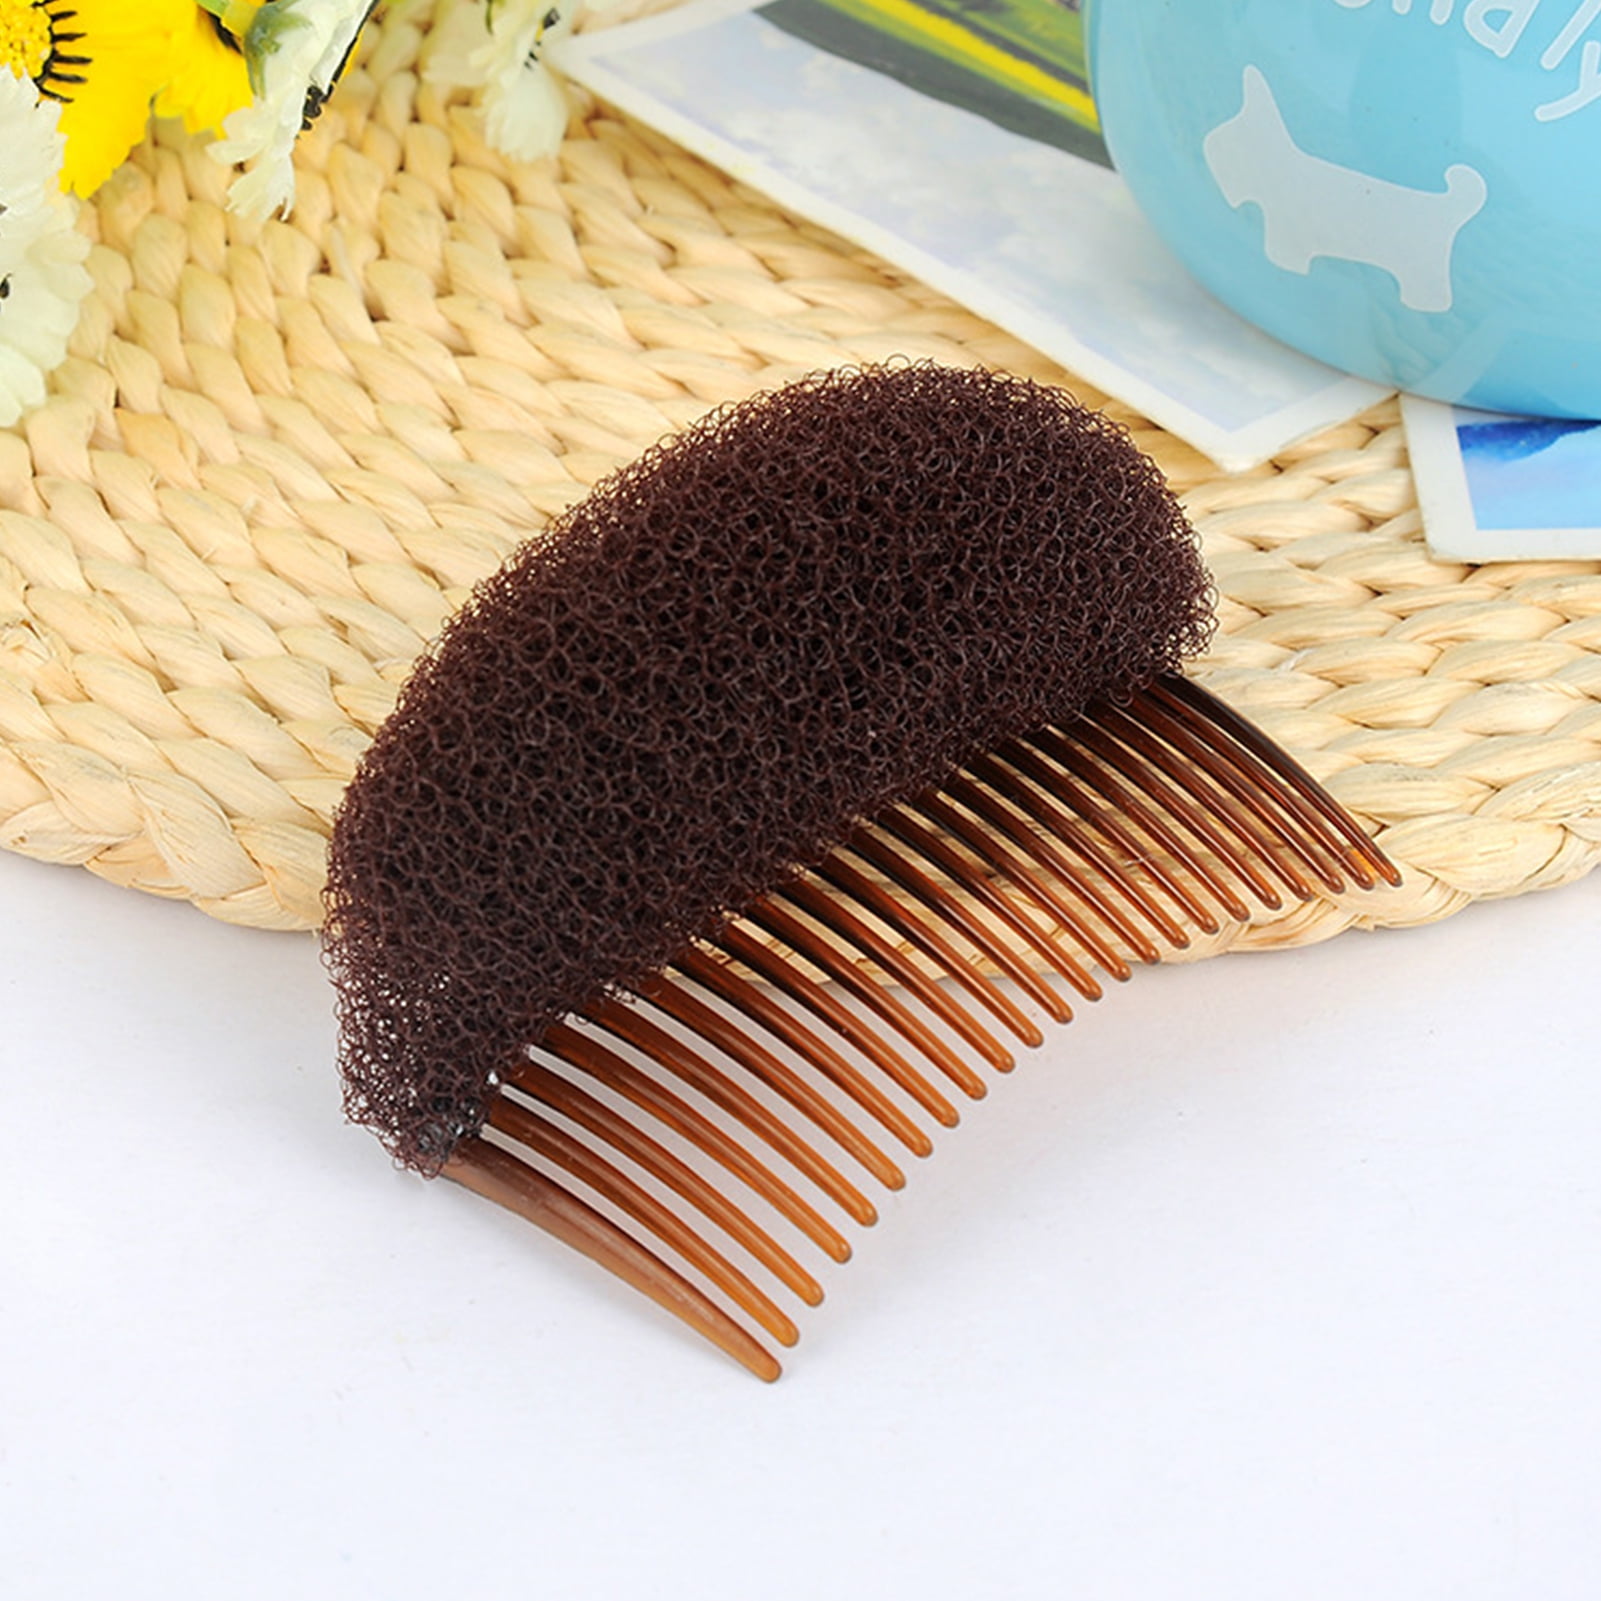 Buy Blackbond Hair Puff high volumizer Banana Bumpit Set of 3pcs. Online at  Low Prices in India - Amazon.in